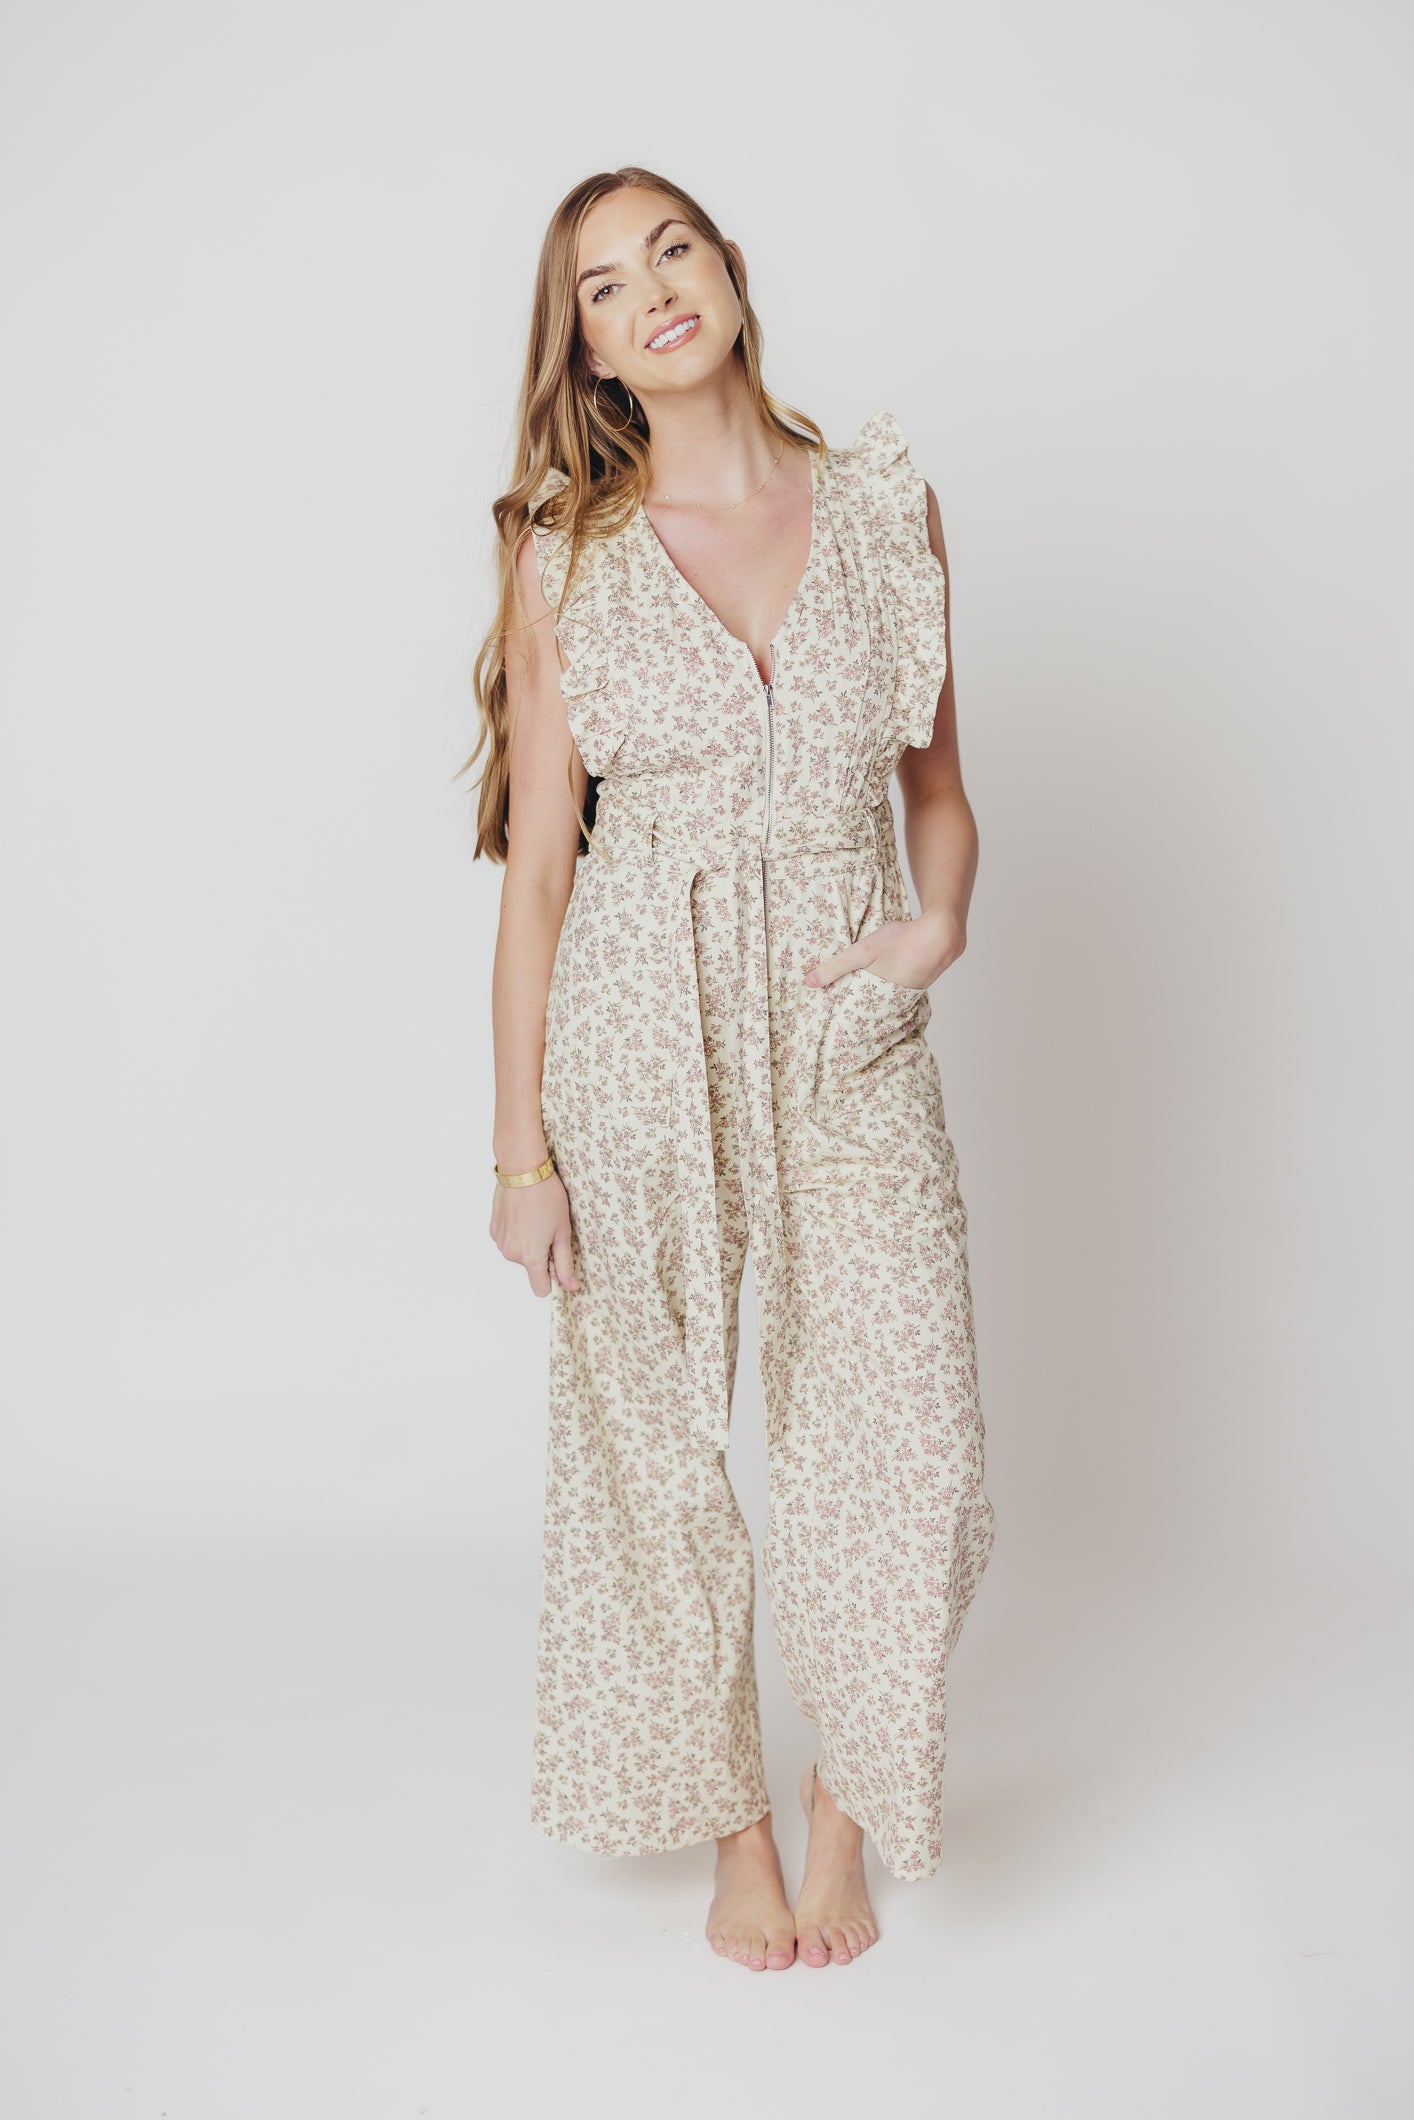 Janet Zippered Jumpsuit with Ruffles in Cream/Pink Floral - Nursing Friendly